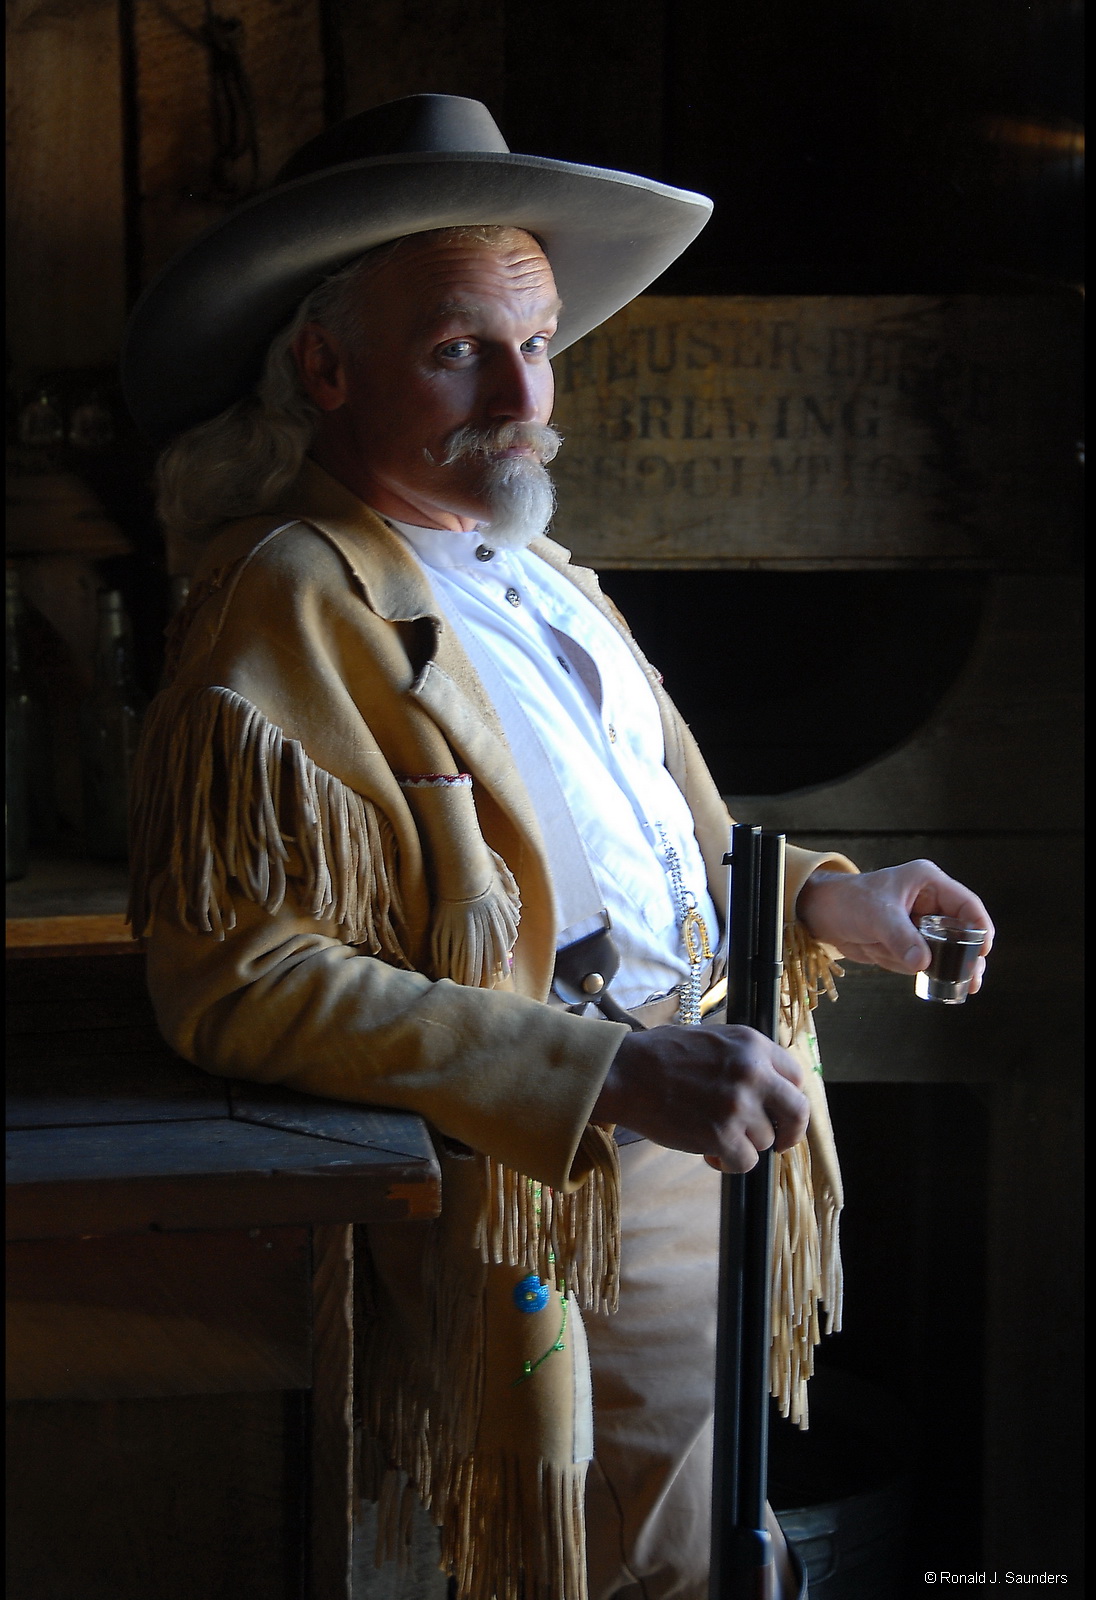 Jake Barzig perorms as Buffalo Bill in the histortic saloon at Silver City, Wyoming.